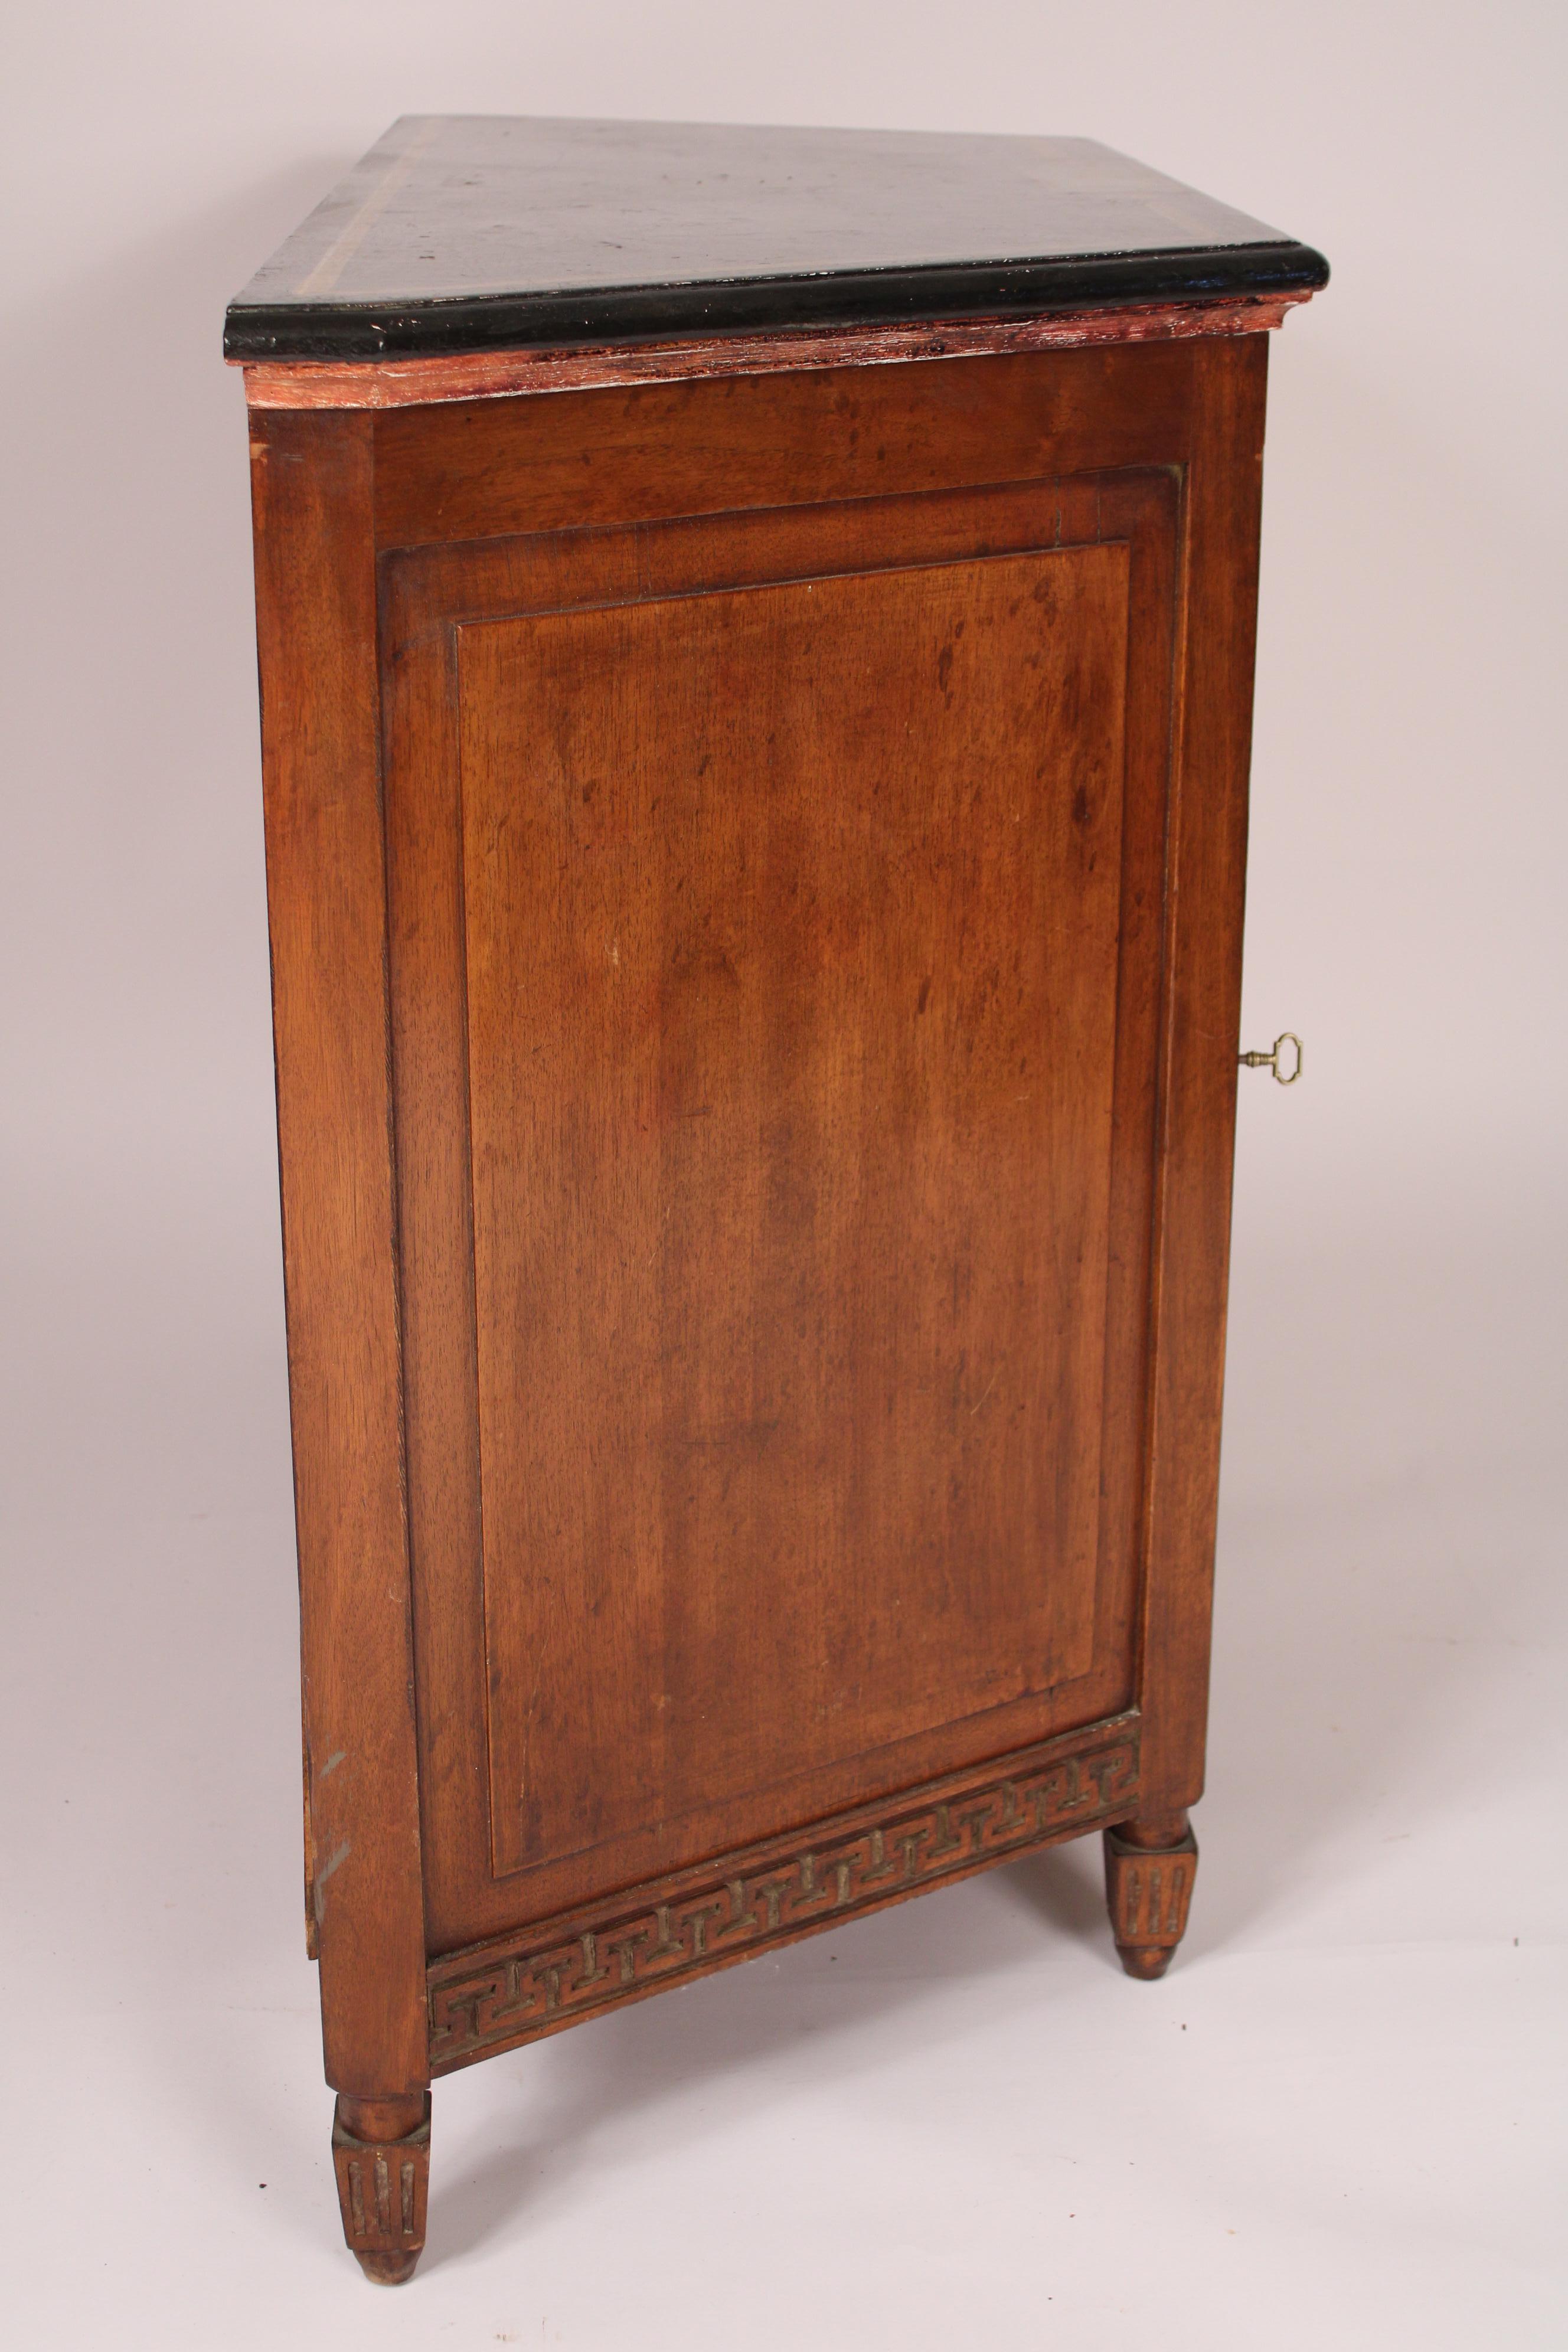 Neo Classical Style Mahogany Cabinet  In Good Condition For Sale In Laguna Beach, CA